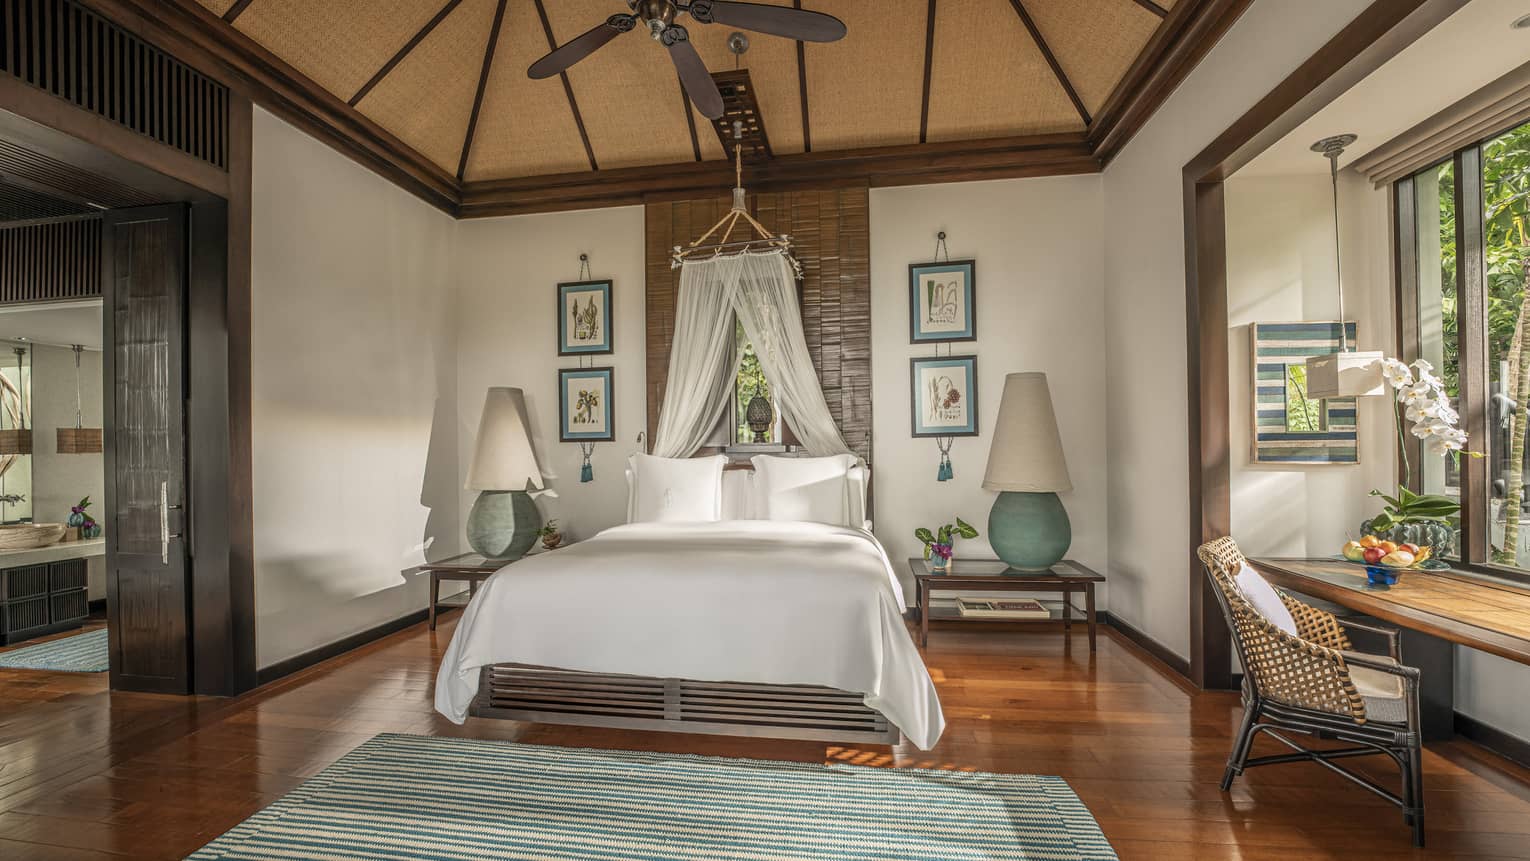 Master bedroom with teak floors, king bed with canopy net, vaulted ceiling and ceiling fan